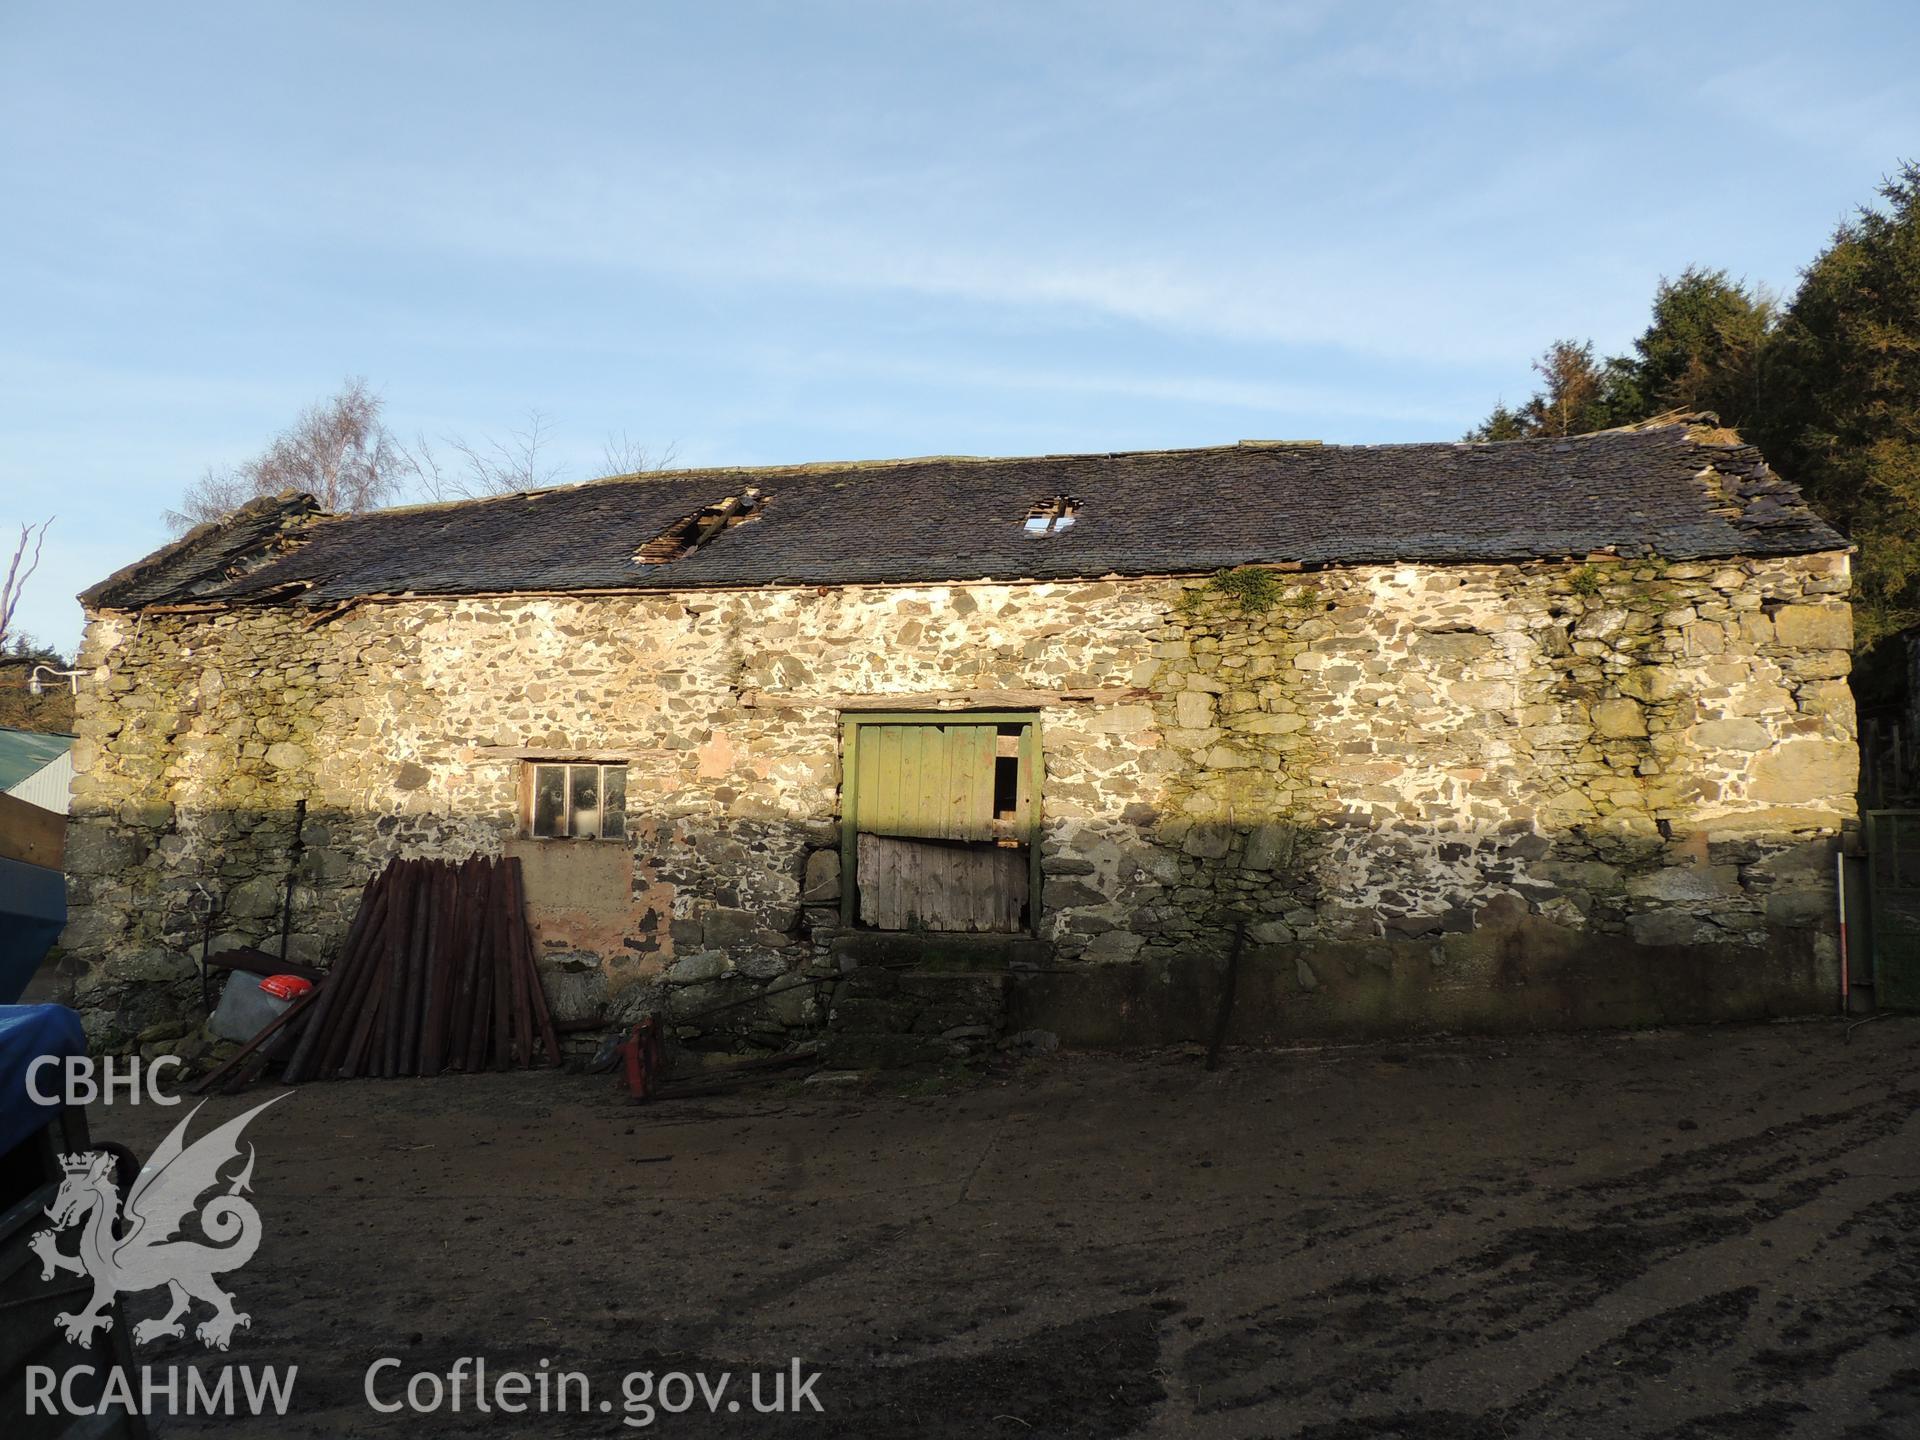 View of front elevation, looking north. Photograph taken as part of archaeological building survey conducted at Bryn Gwylan Threshing Barn, Llangernyw, Conwy, carried out by Archaeology Wales, 2017-2018. Report no. 1640. Project no. 2578.